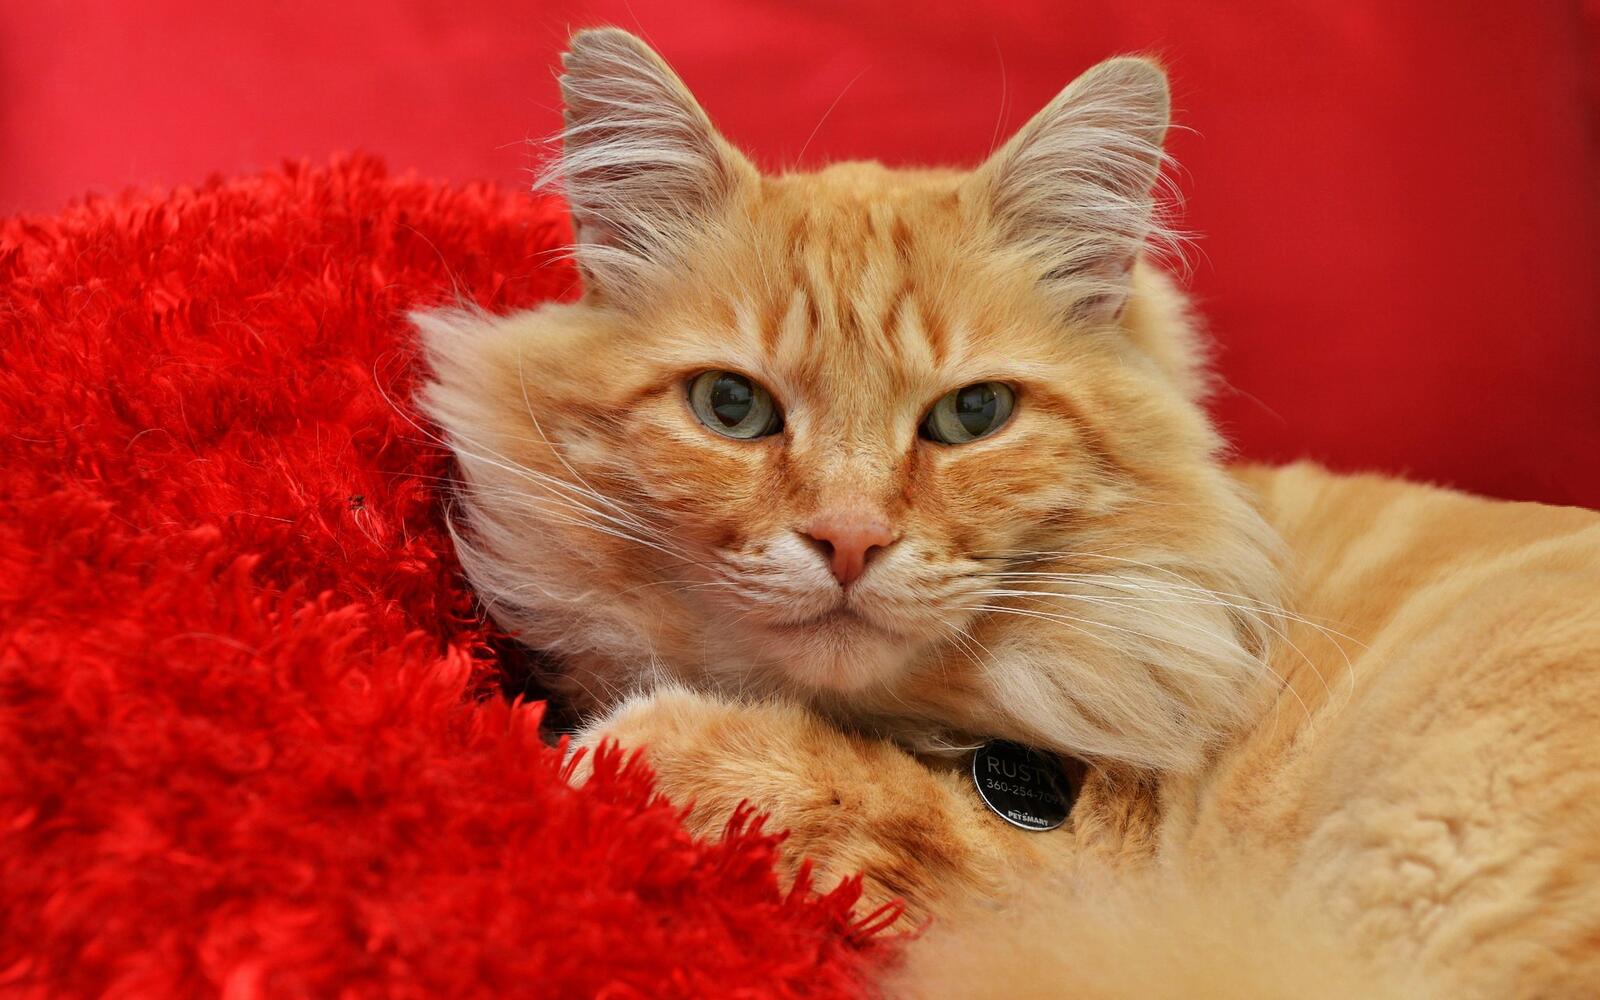 Free photo A red cat lying on a red blanket